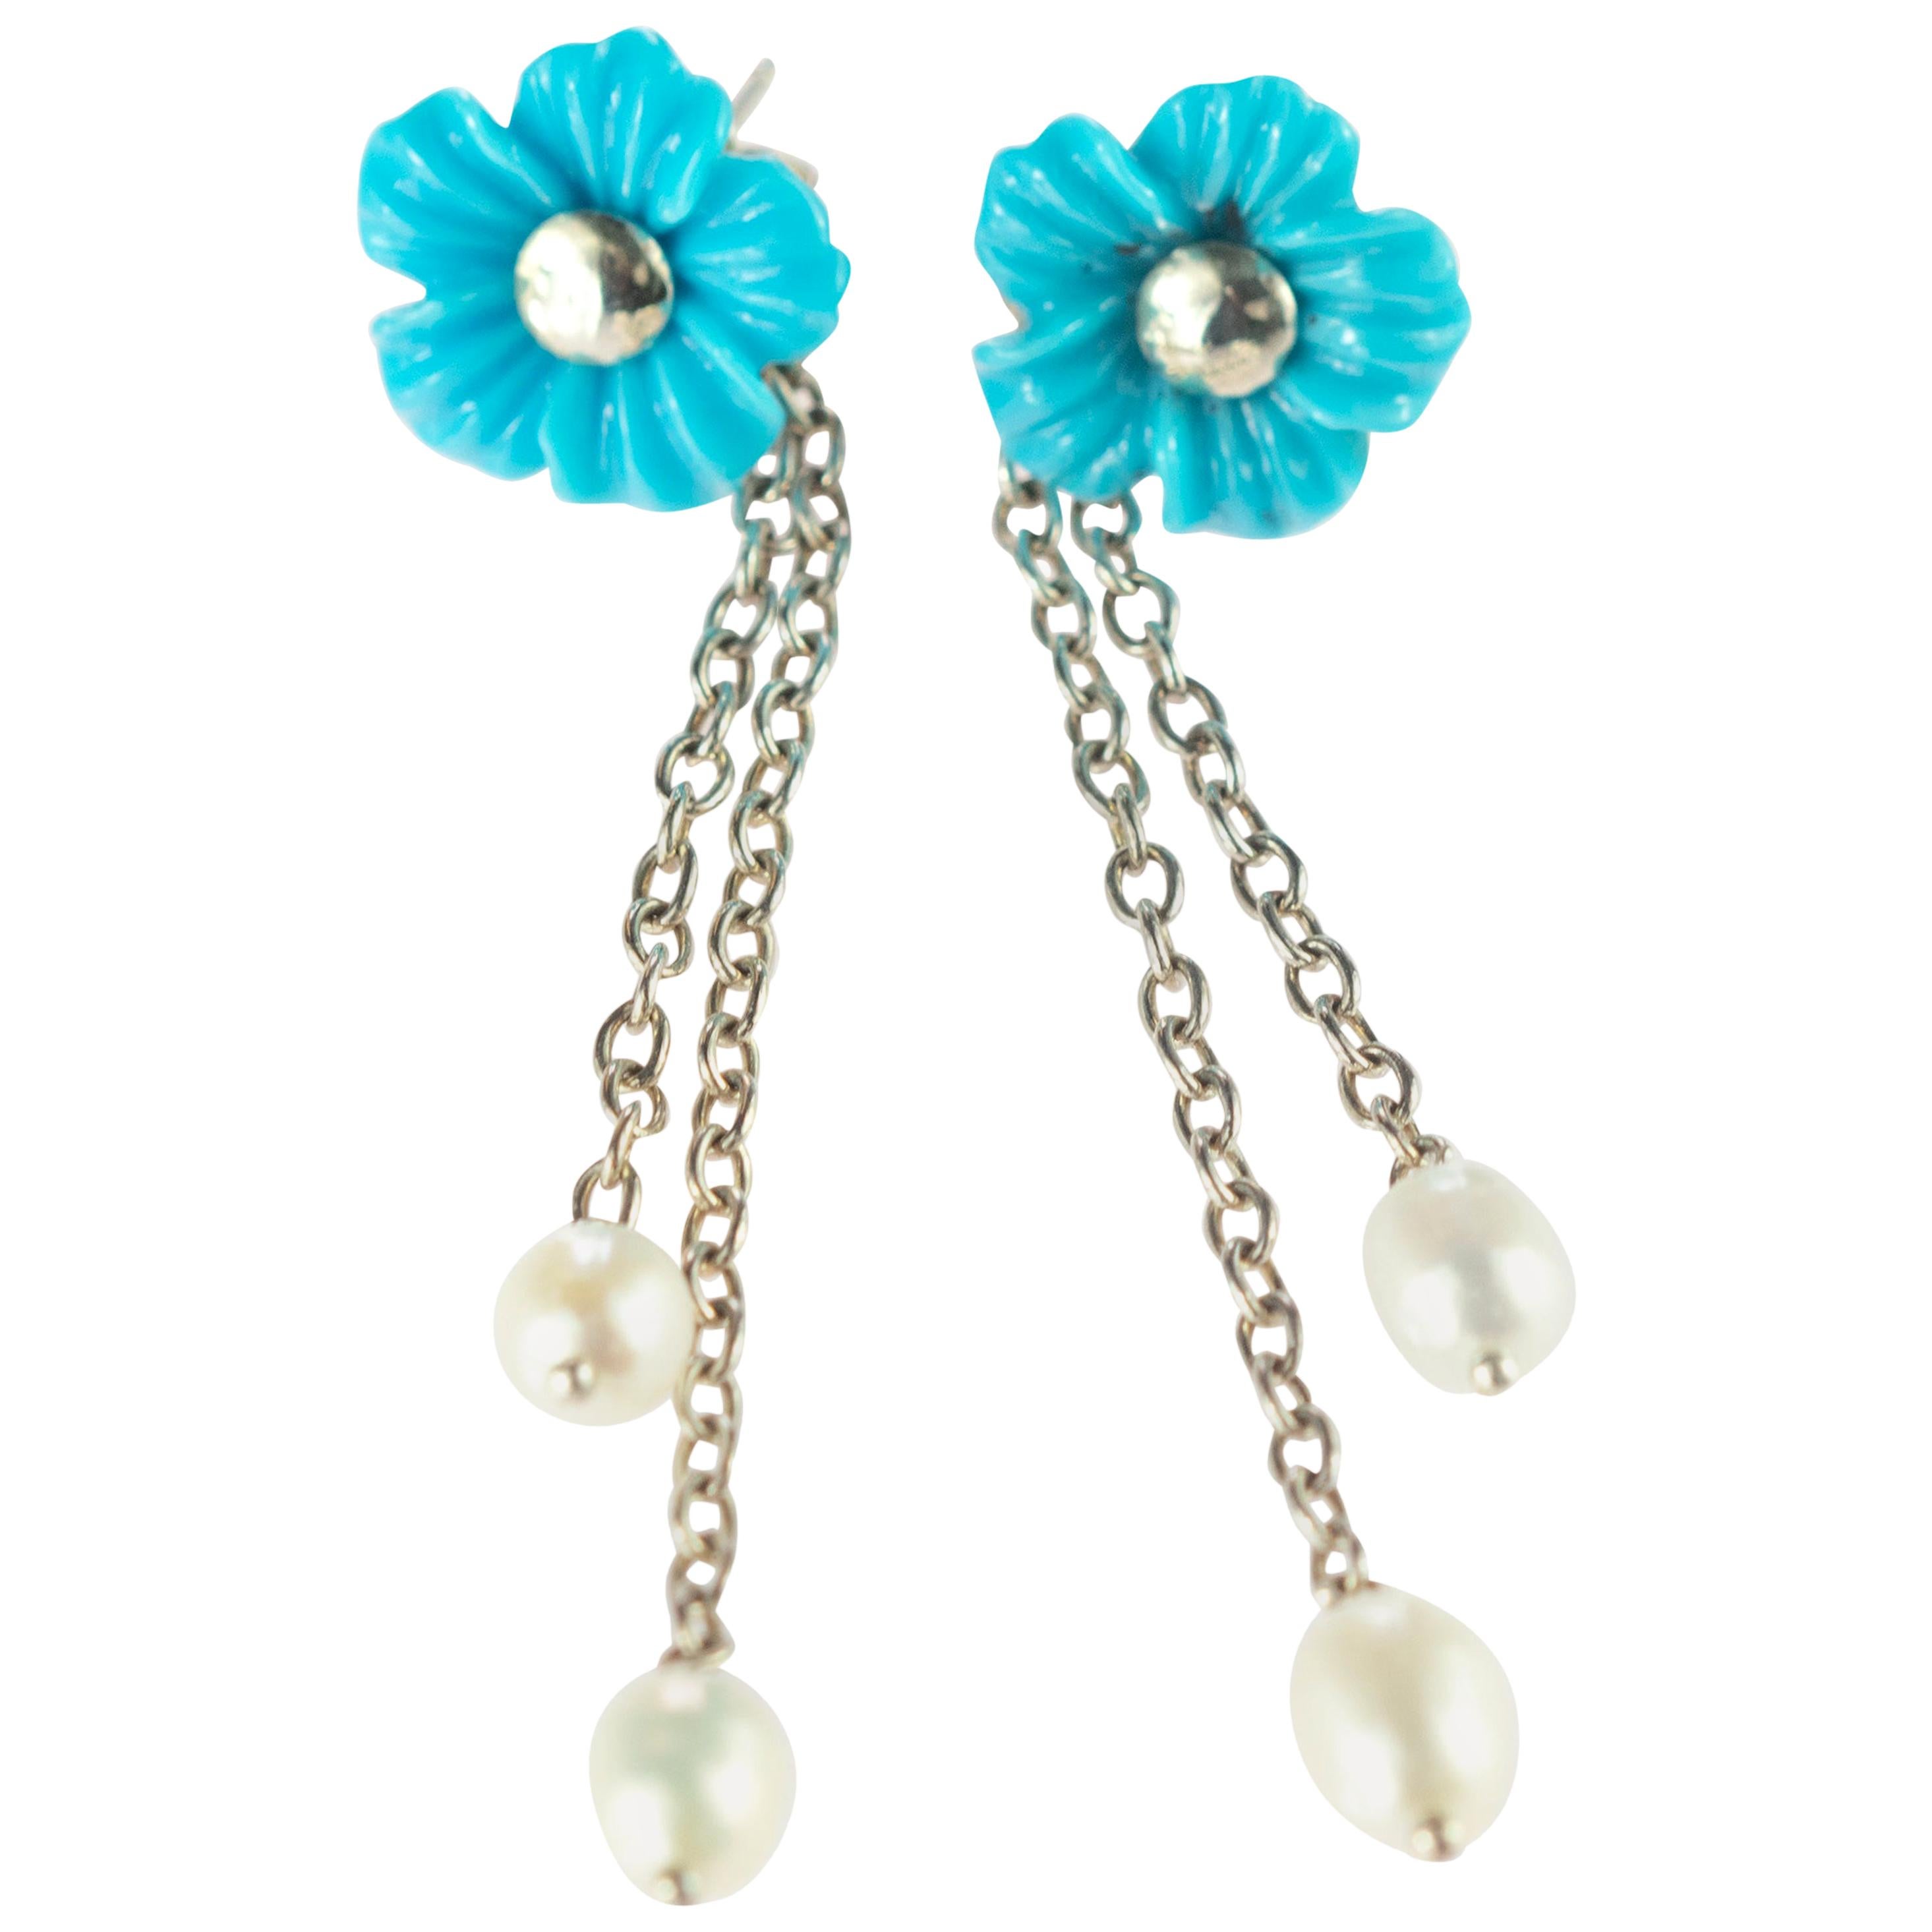 Natural Turquoise Flowers 925 Sterling Silver Freshwater Pearls Dangle Earrings For Sale